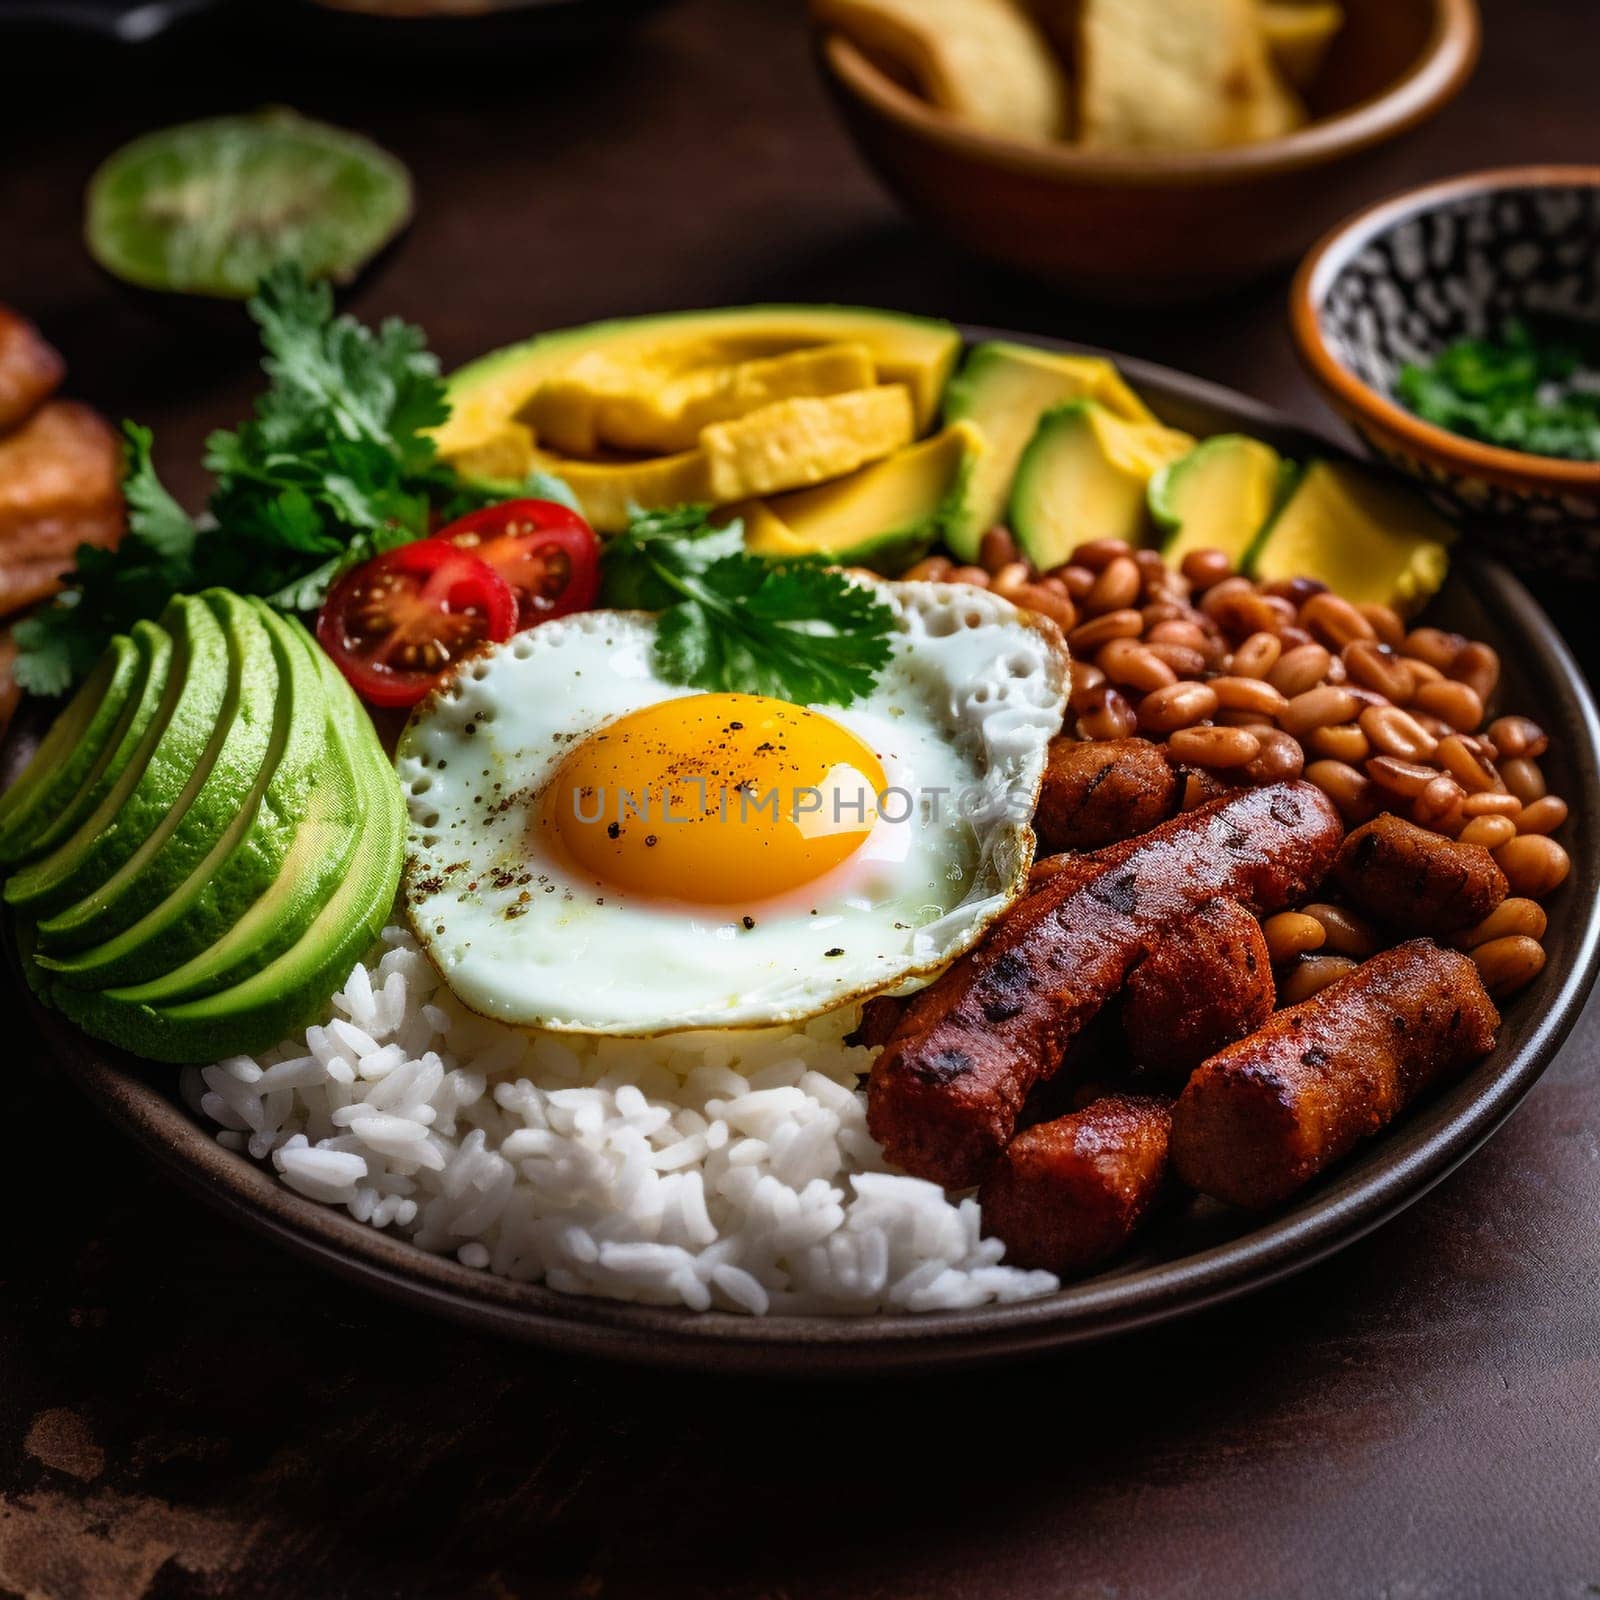 Colombian Bandeja Paisa (Mixed Platter) in a Lively Street Market Scene by Sahin